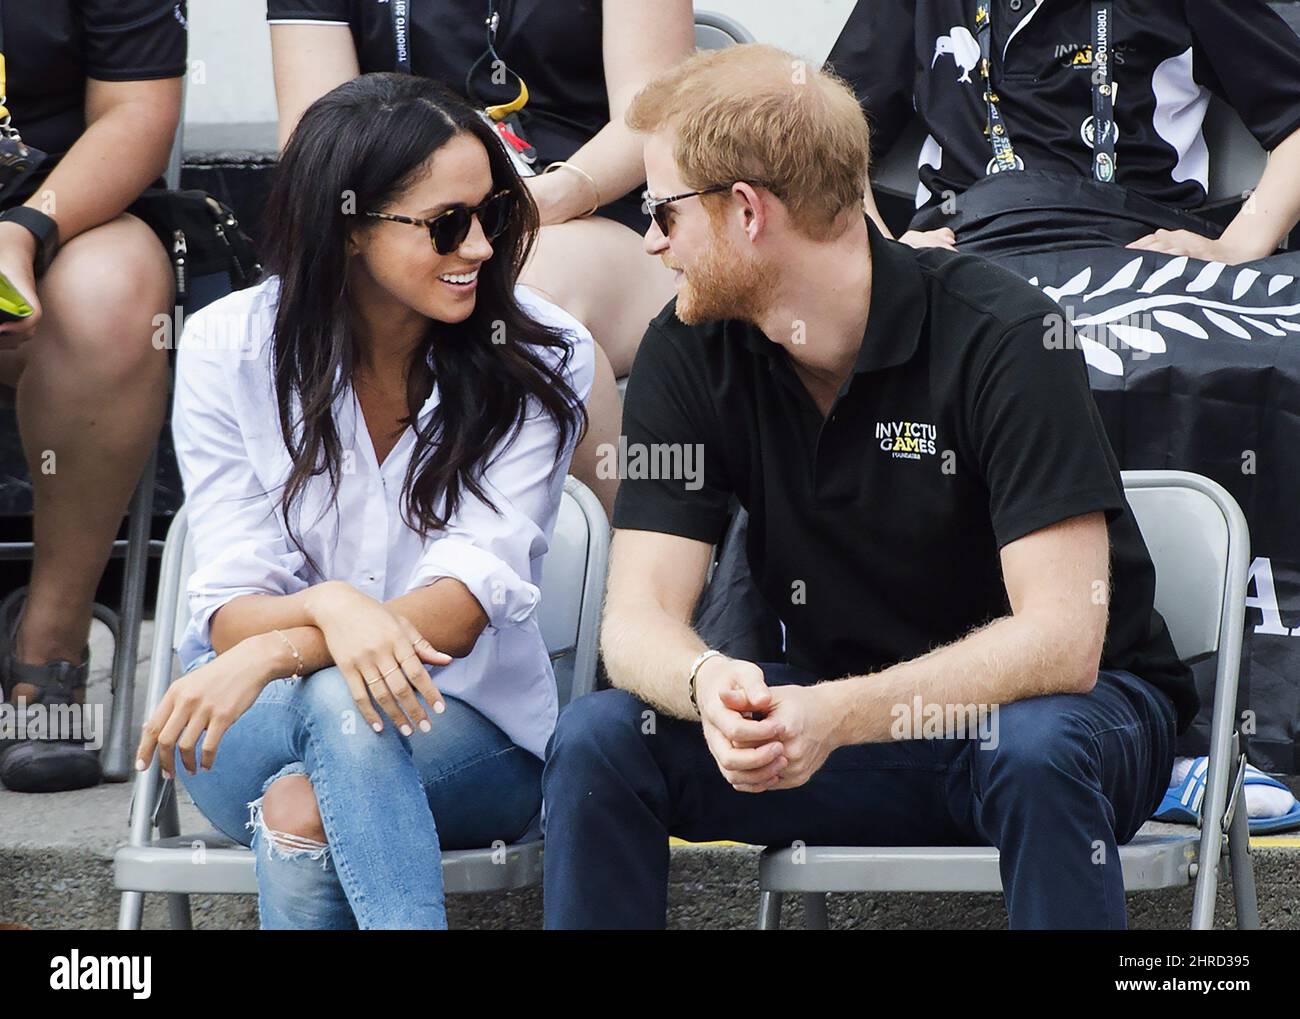 Prince Harry and his girlfriend Meghan Markle attend the wheelchair tennis  competition during the Invictus Games in Toronto on Monday, September 25,  2017. This is Prince Harry's first public appearance with Markle.